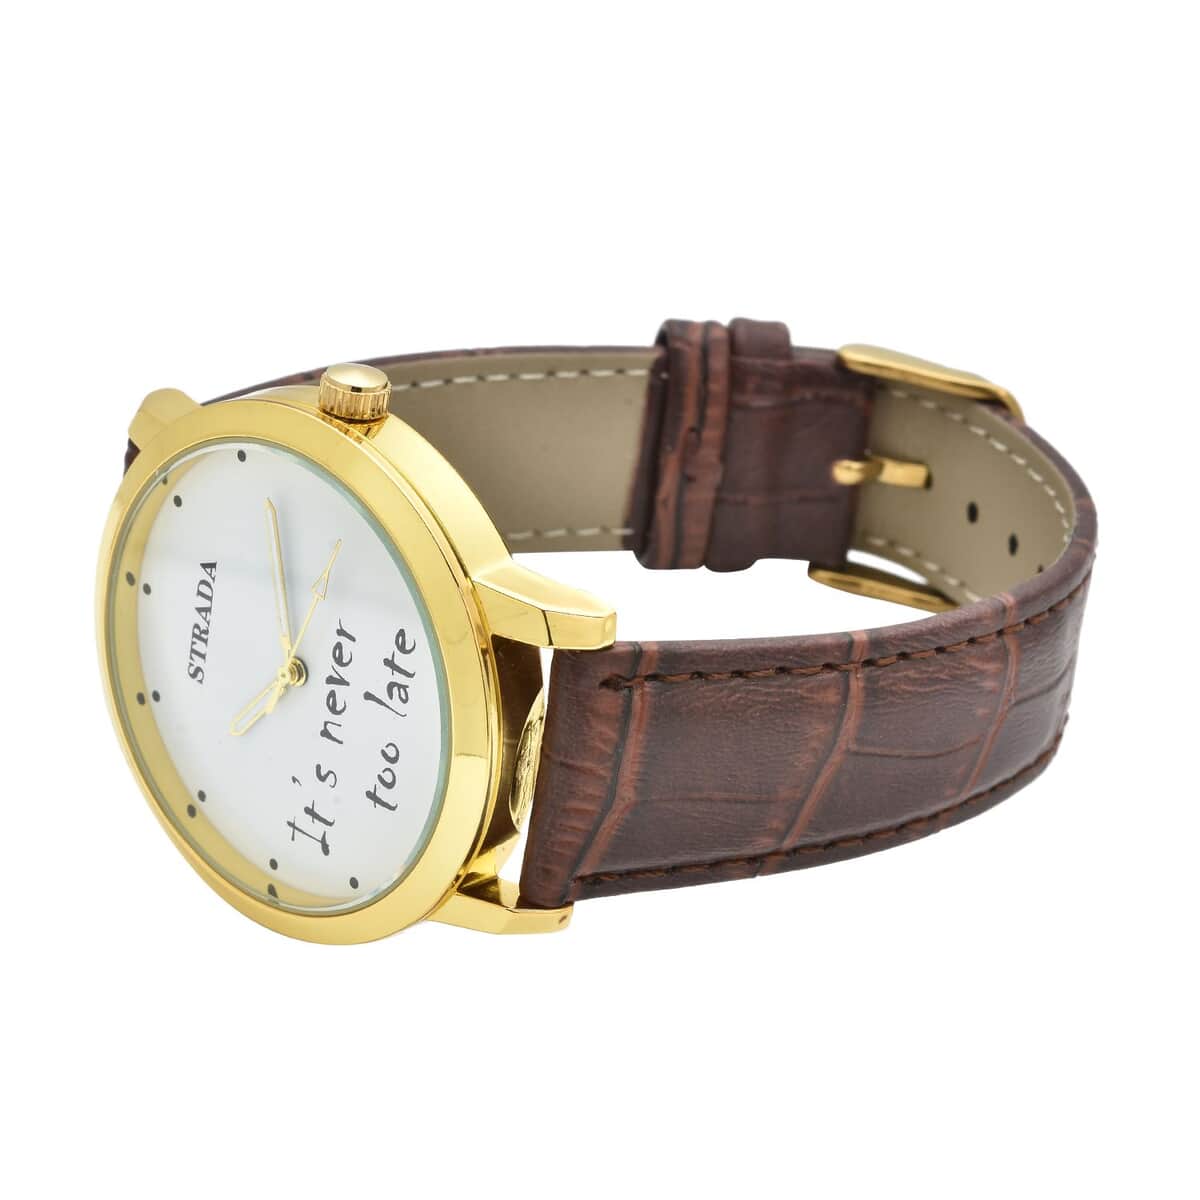 STRADA Japanese Movement Whatever I'm late anyway Dial Watch with Brown Faux Leather Strap (40.38mm) (7.5-9.0 Inch) image number 3